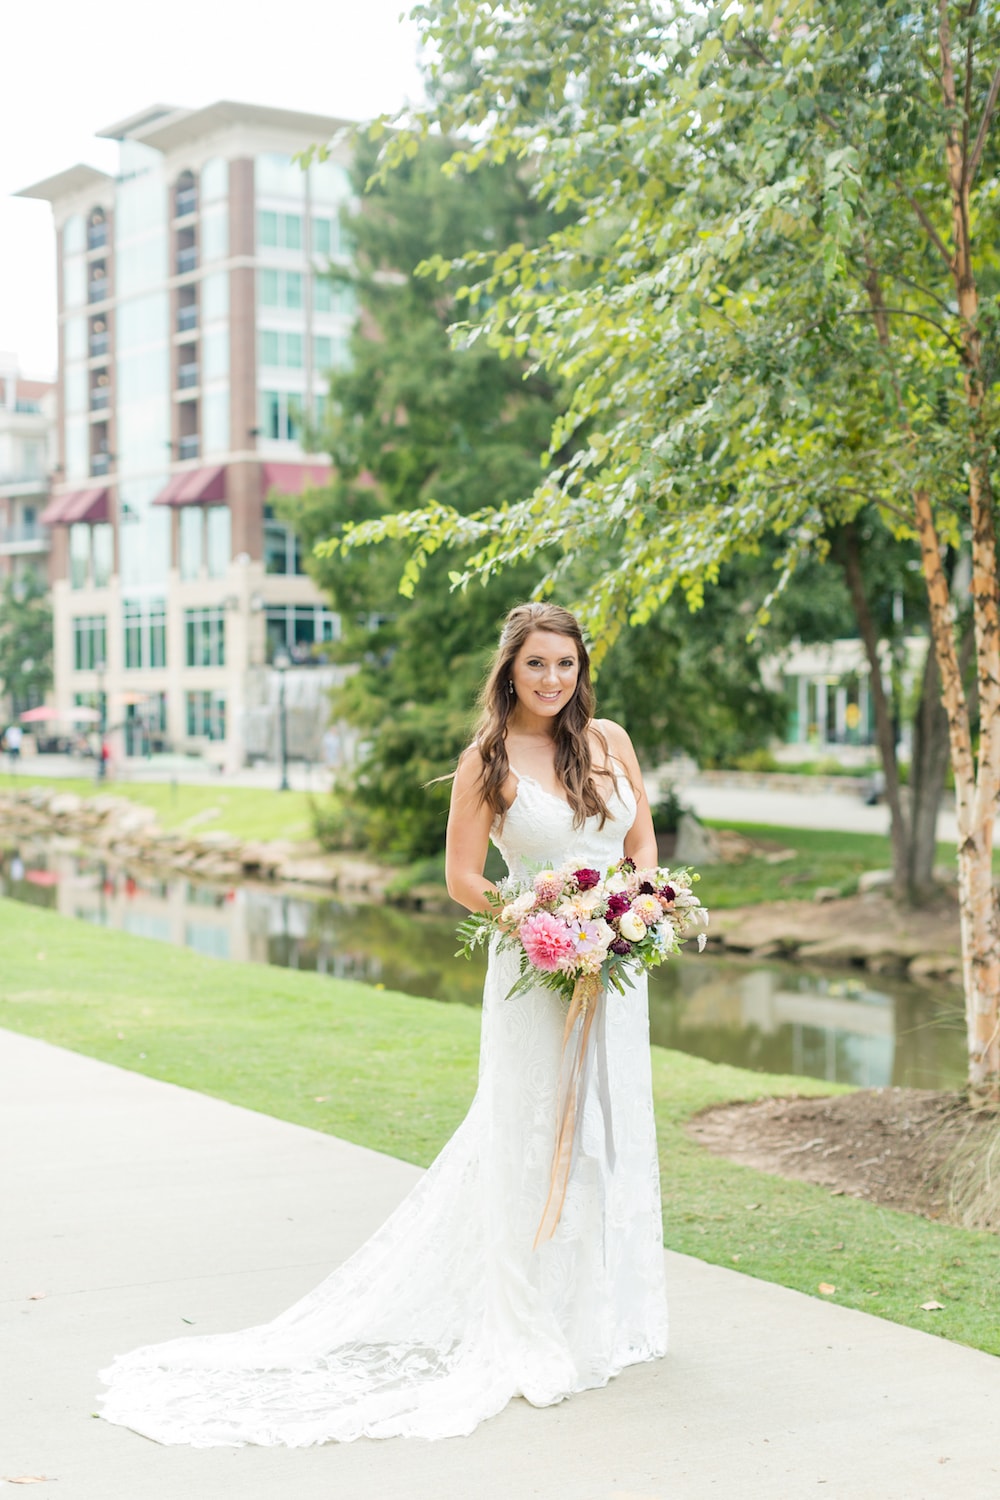 bride stands on a sidewalk in a city